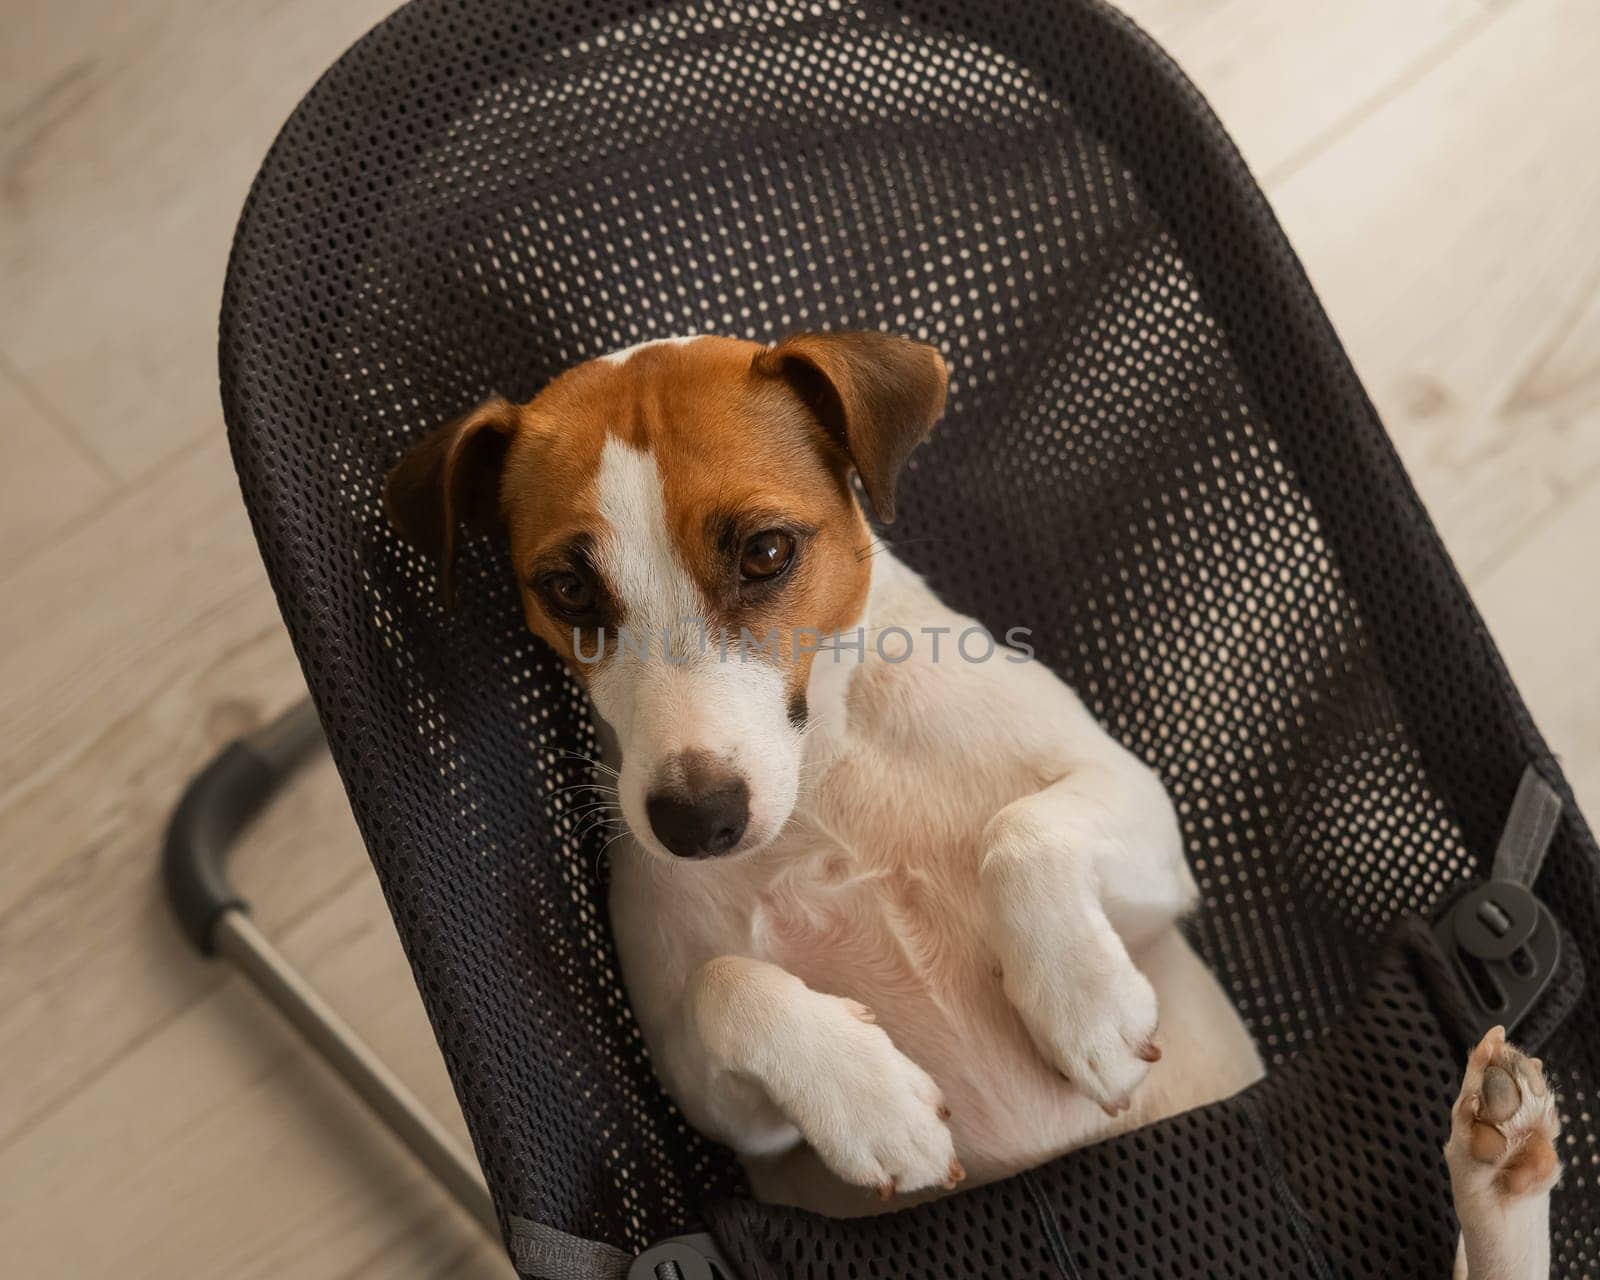 A Jack Russell Terrier dog lies in a children's lounge chair. by mrwed54